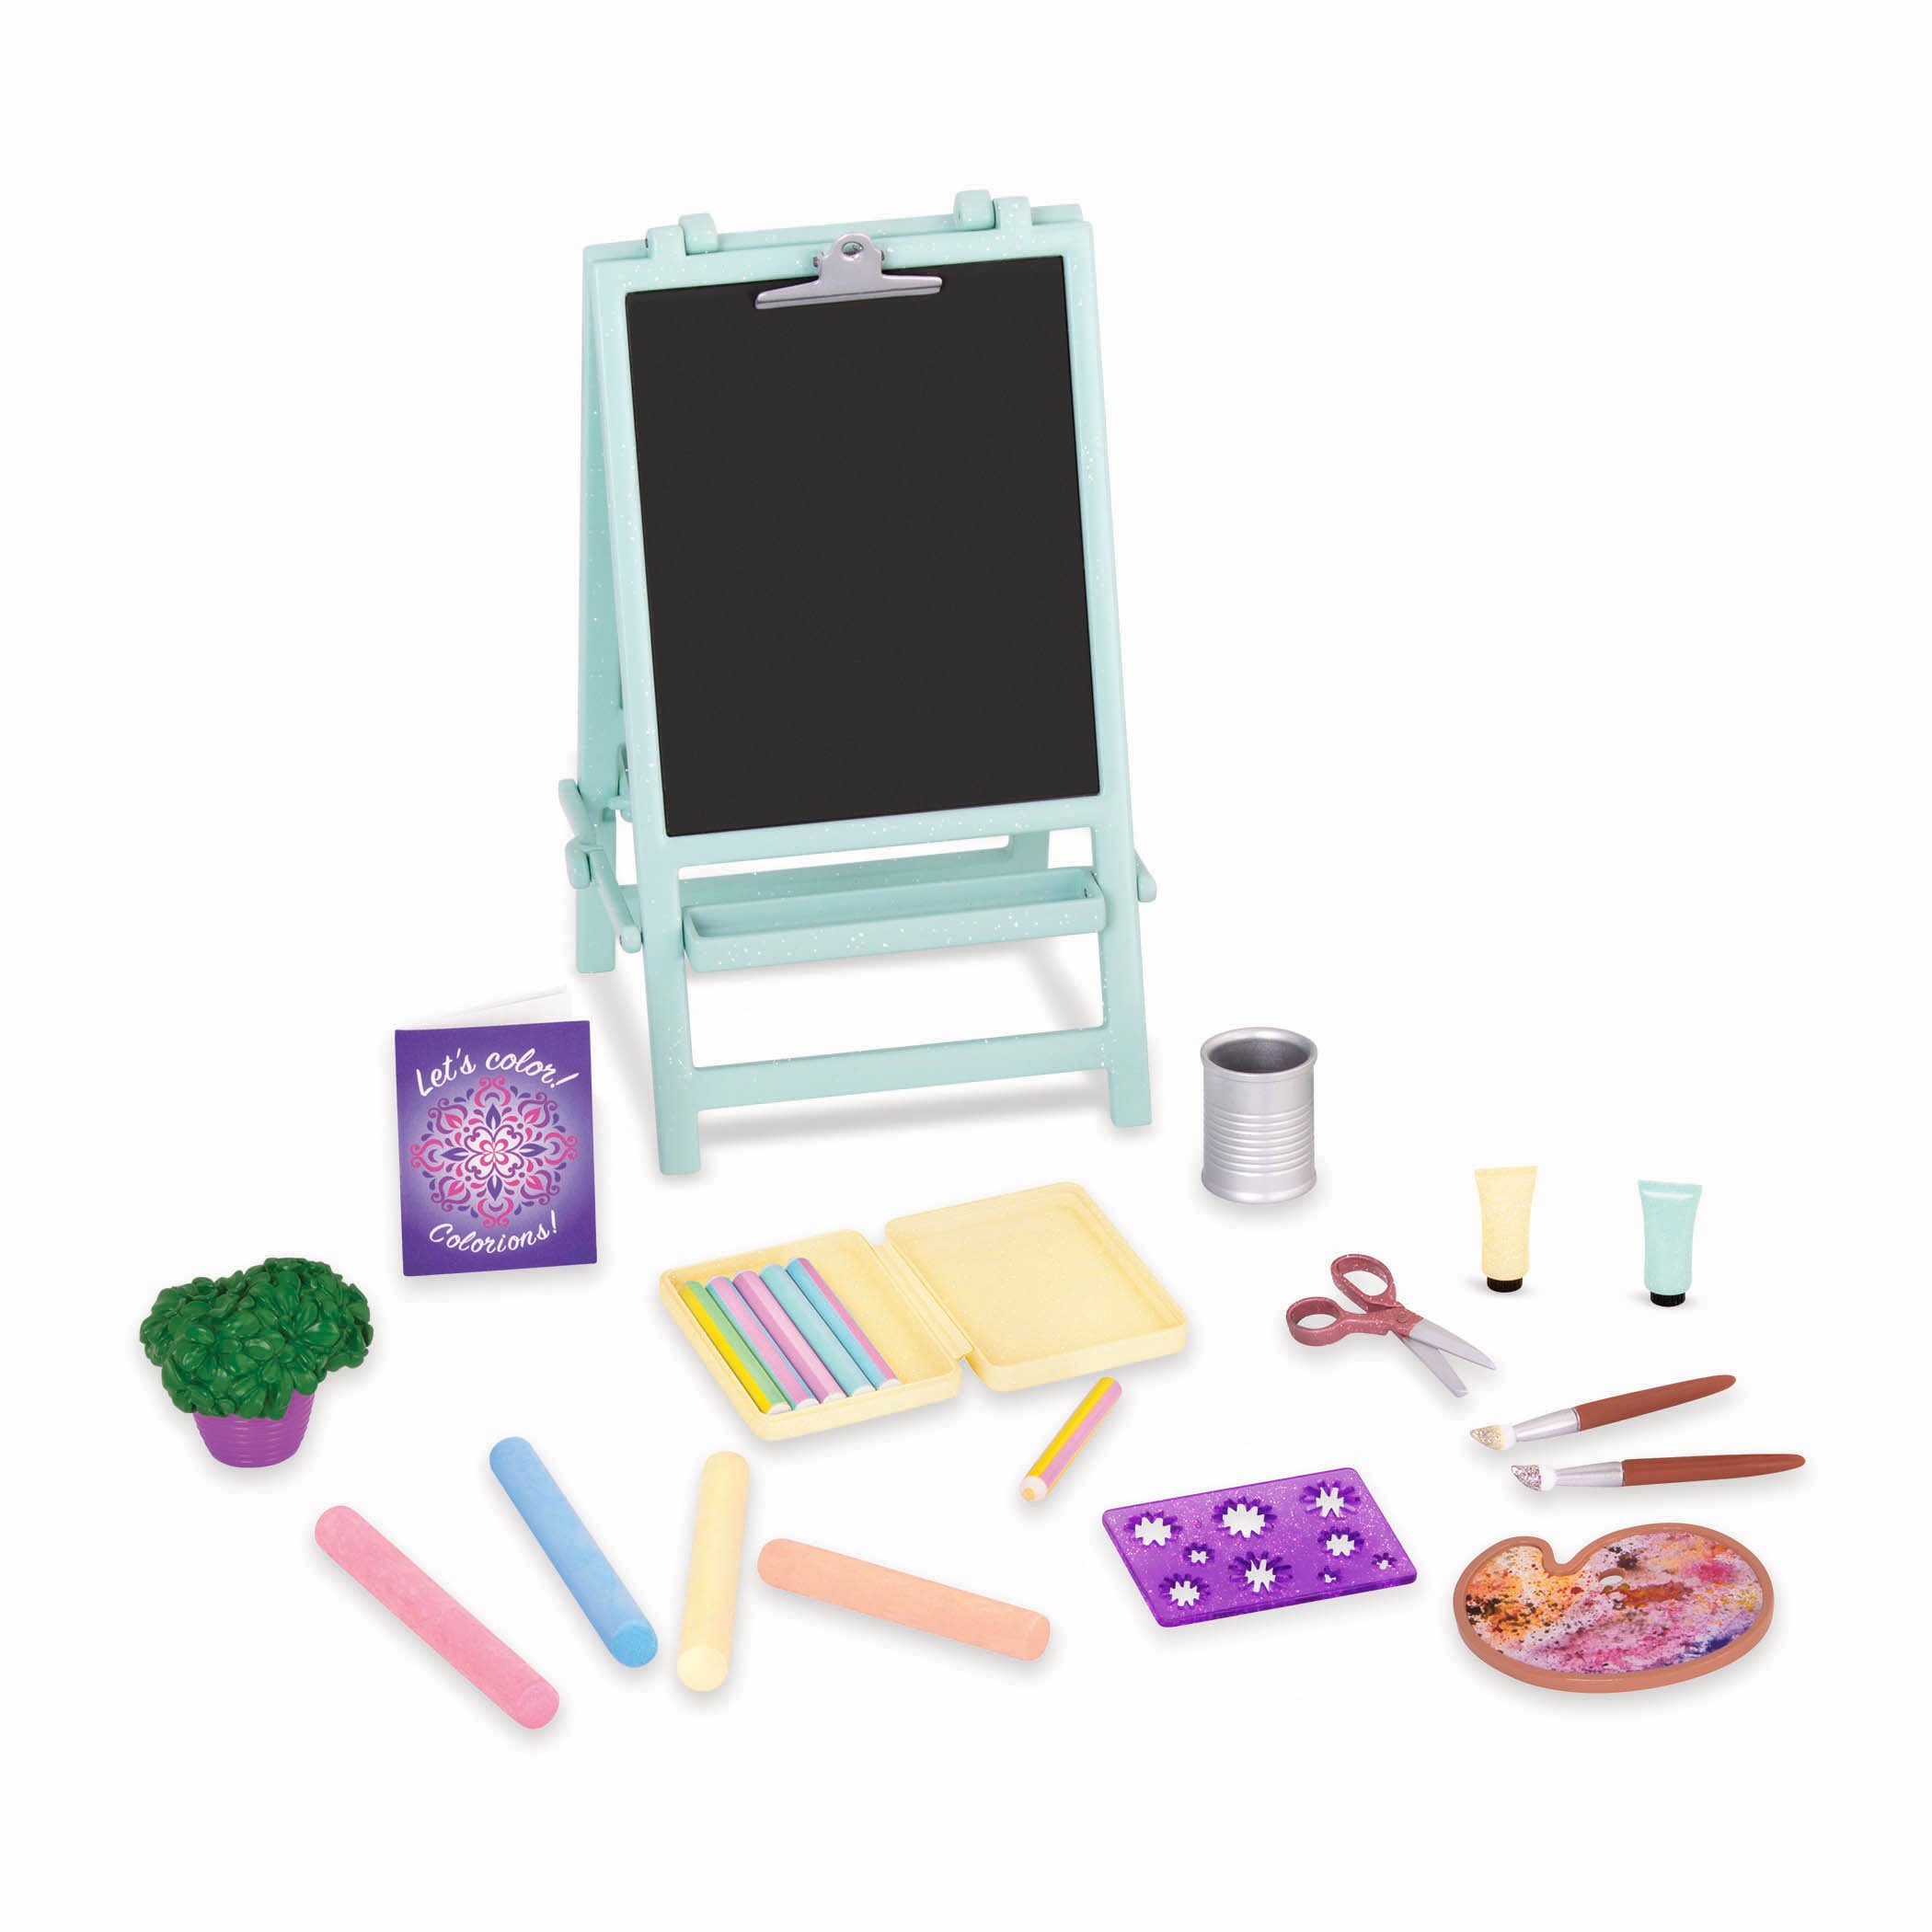 Glitter Girls by Battat – Creative Art Kit Chalkboard Easel Accessory Set – 14-inch Doll Clothes and Accessories for Girls Age 3 and Up – Children’s Toys, 14 inches , Black